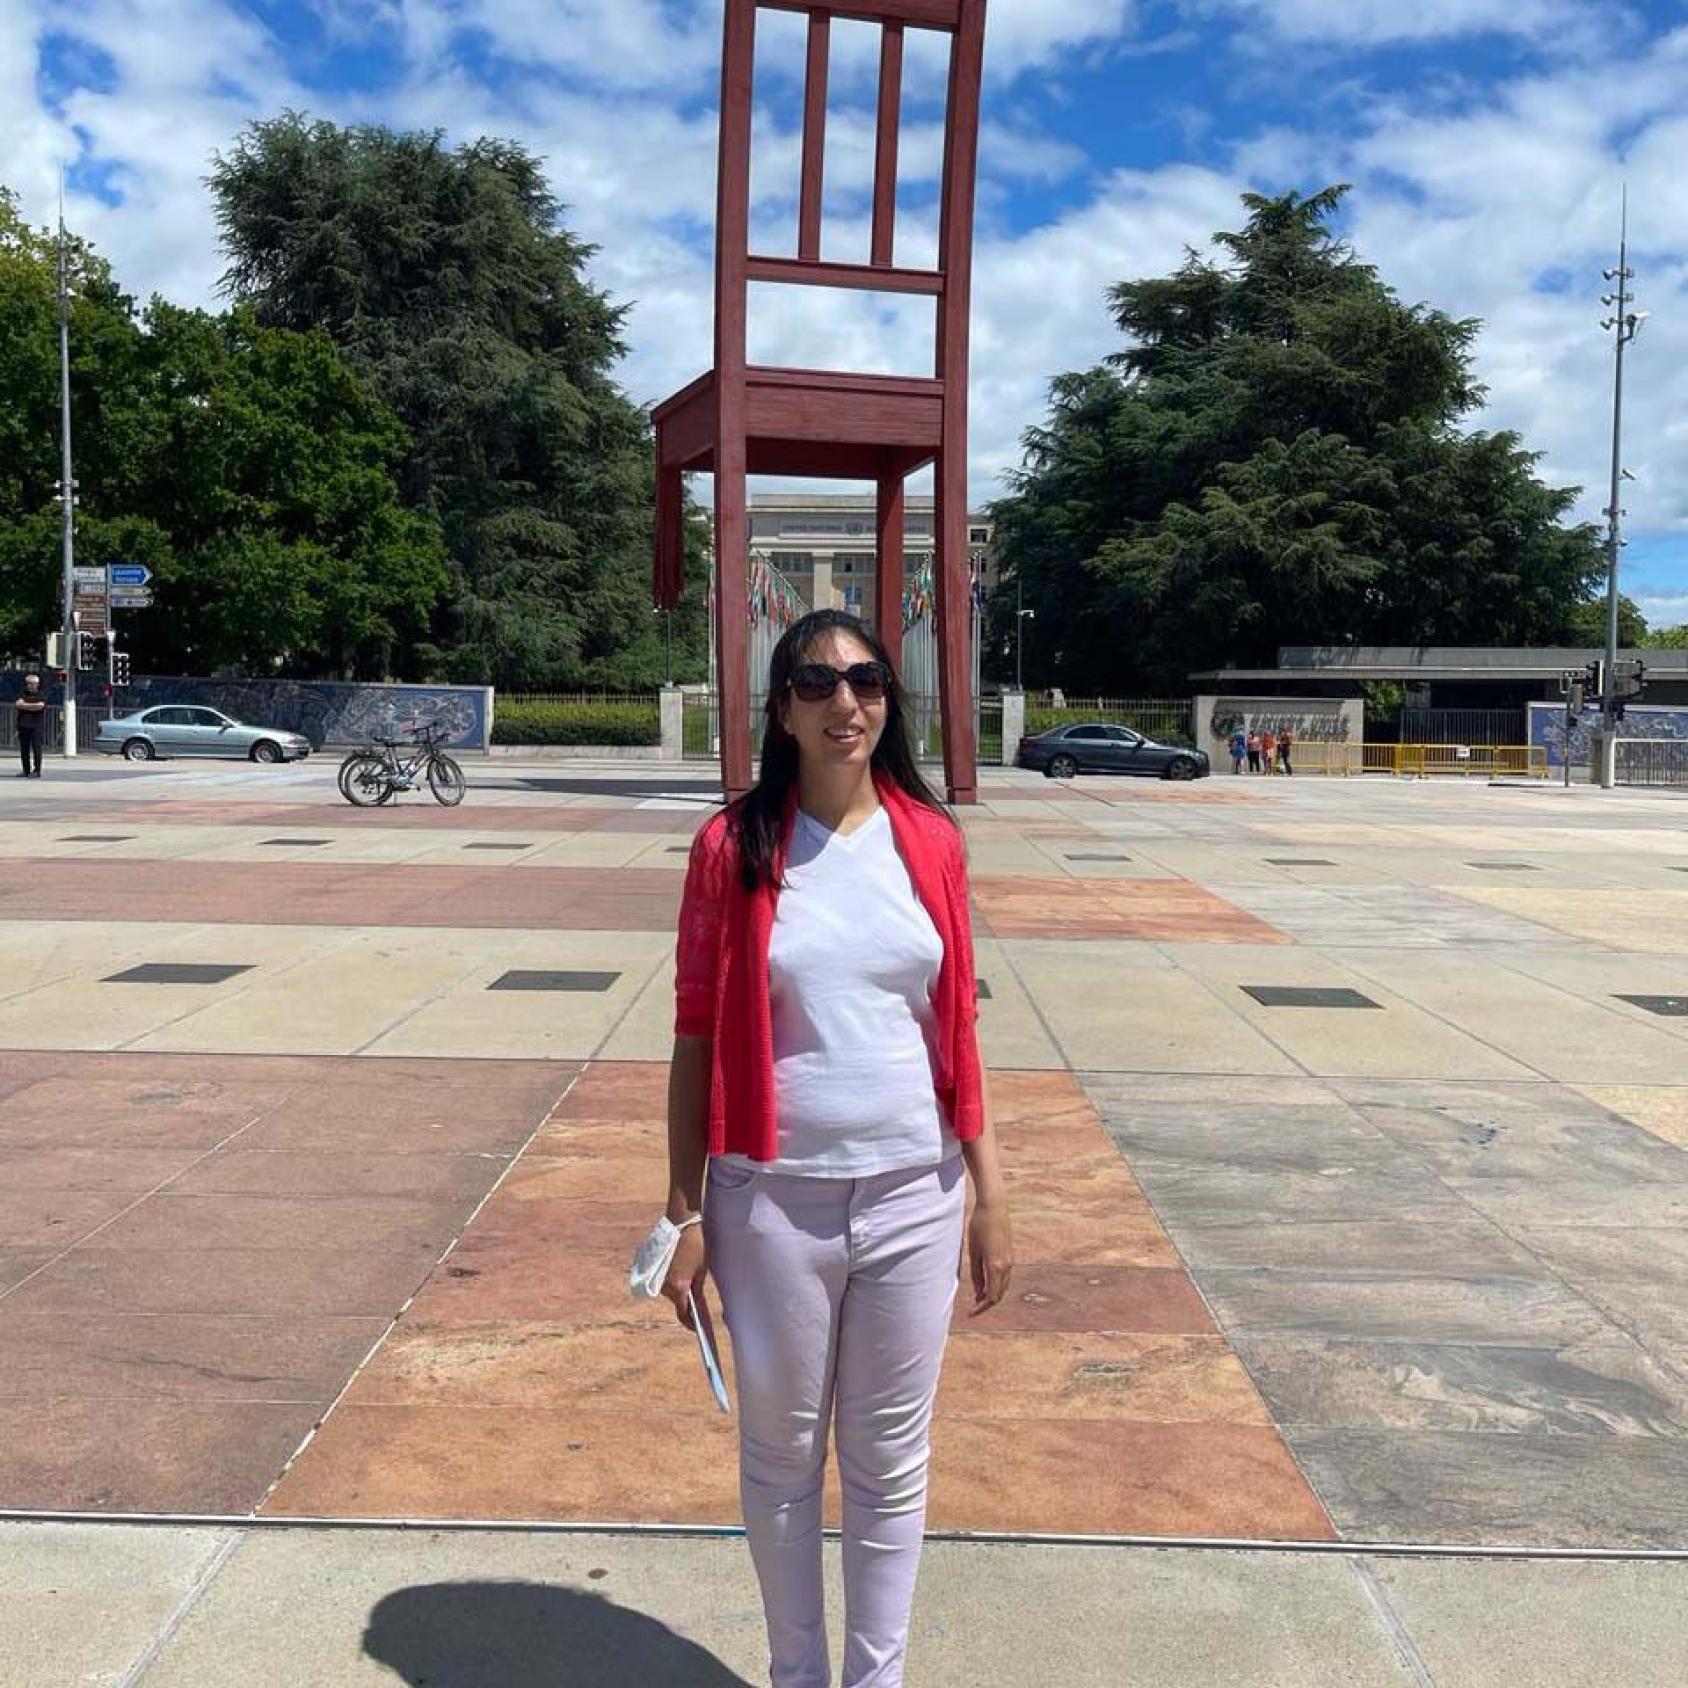 Samaneh wearing a red cardigan and a white shirt stands in front of a large statue of a chair. 